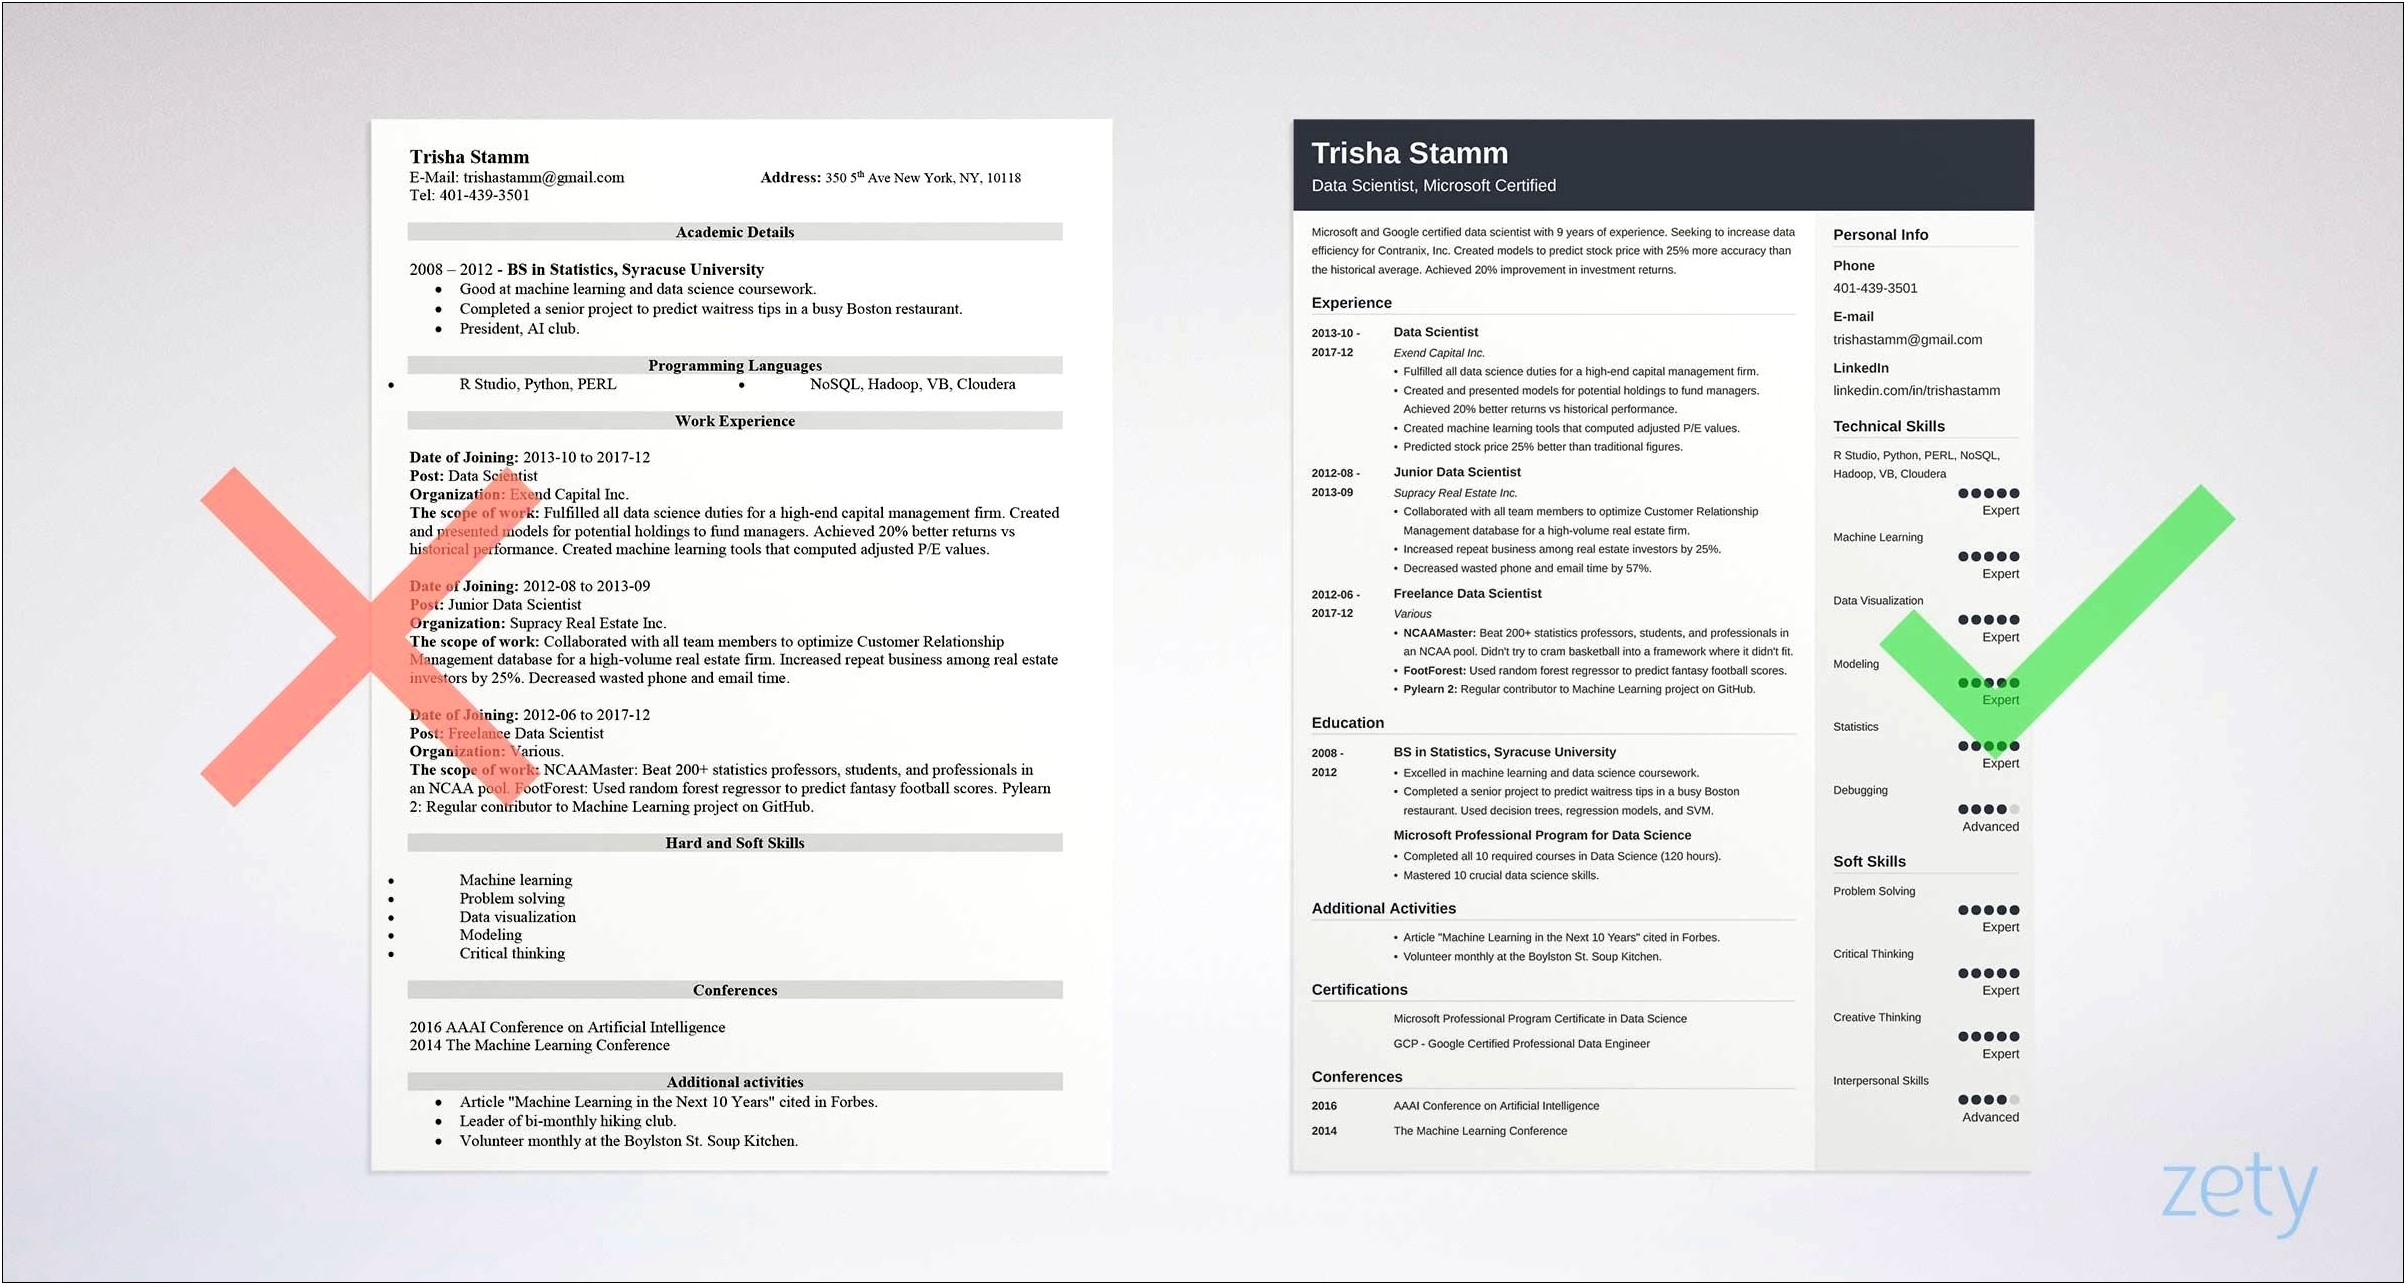 Data Scientist Entry Level Resume Example